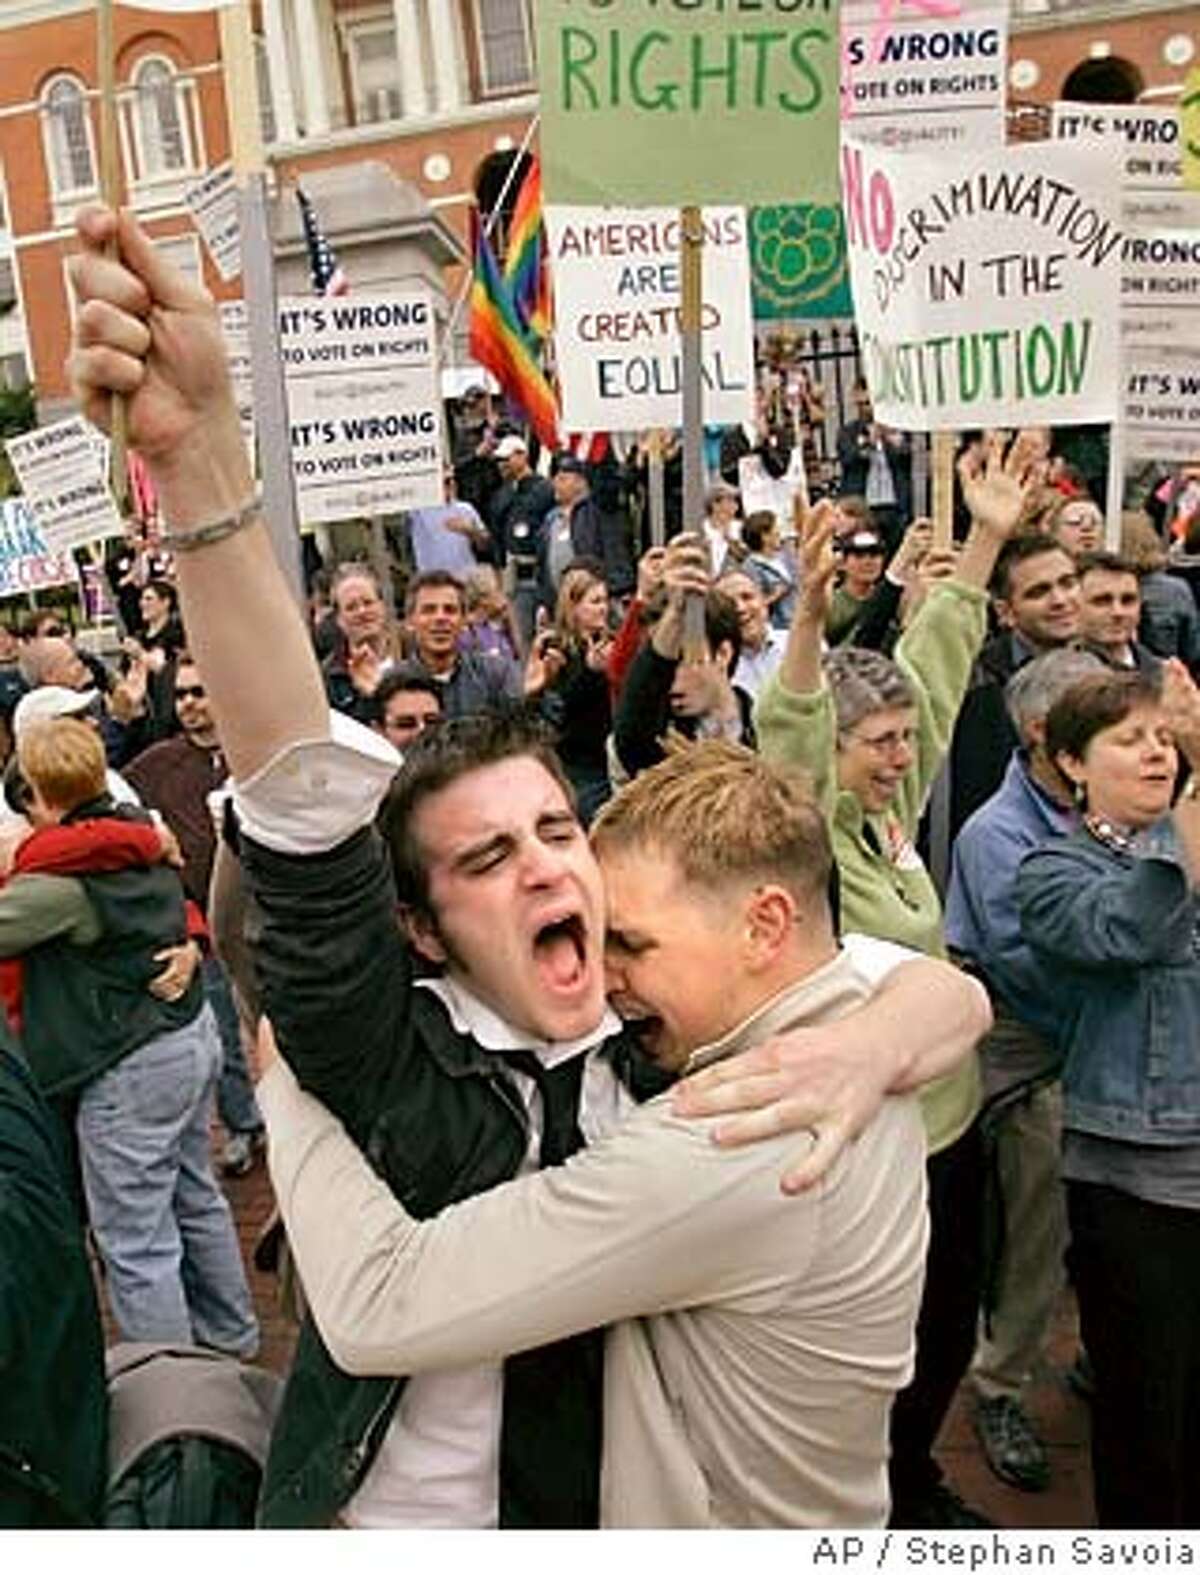 Greg Kimball, left, of Manchester, Mass., and his partner of five months, Brian O'Connor hug as they celebrate after Massachusetts lawmakers voted to kill a proposed constitutional amendment to ban gay marriage at the Statehouse in Boston, Thursday afternoon, June 14, 2007. Kimball said he and O'Connor plan to marry now that the legal issue is settled. (AP Photo/Stephan Savoia)